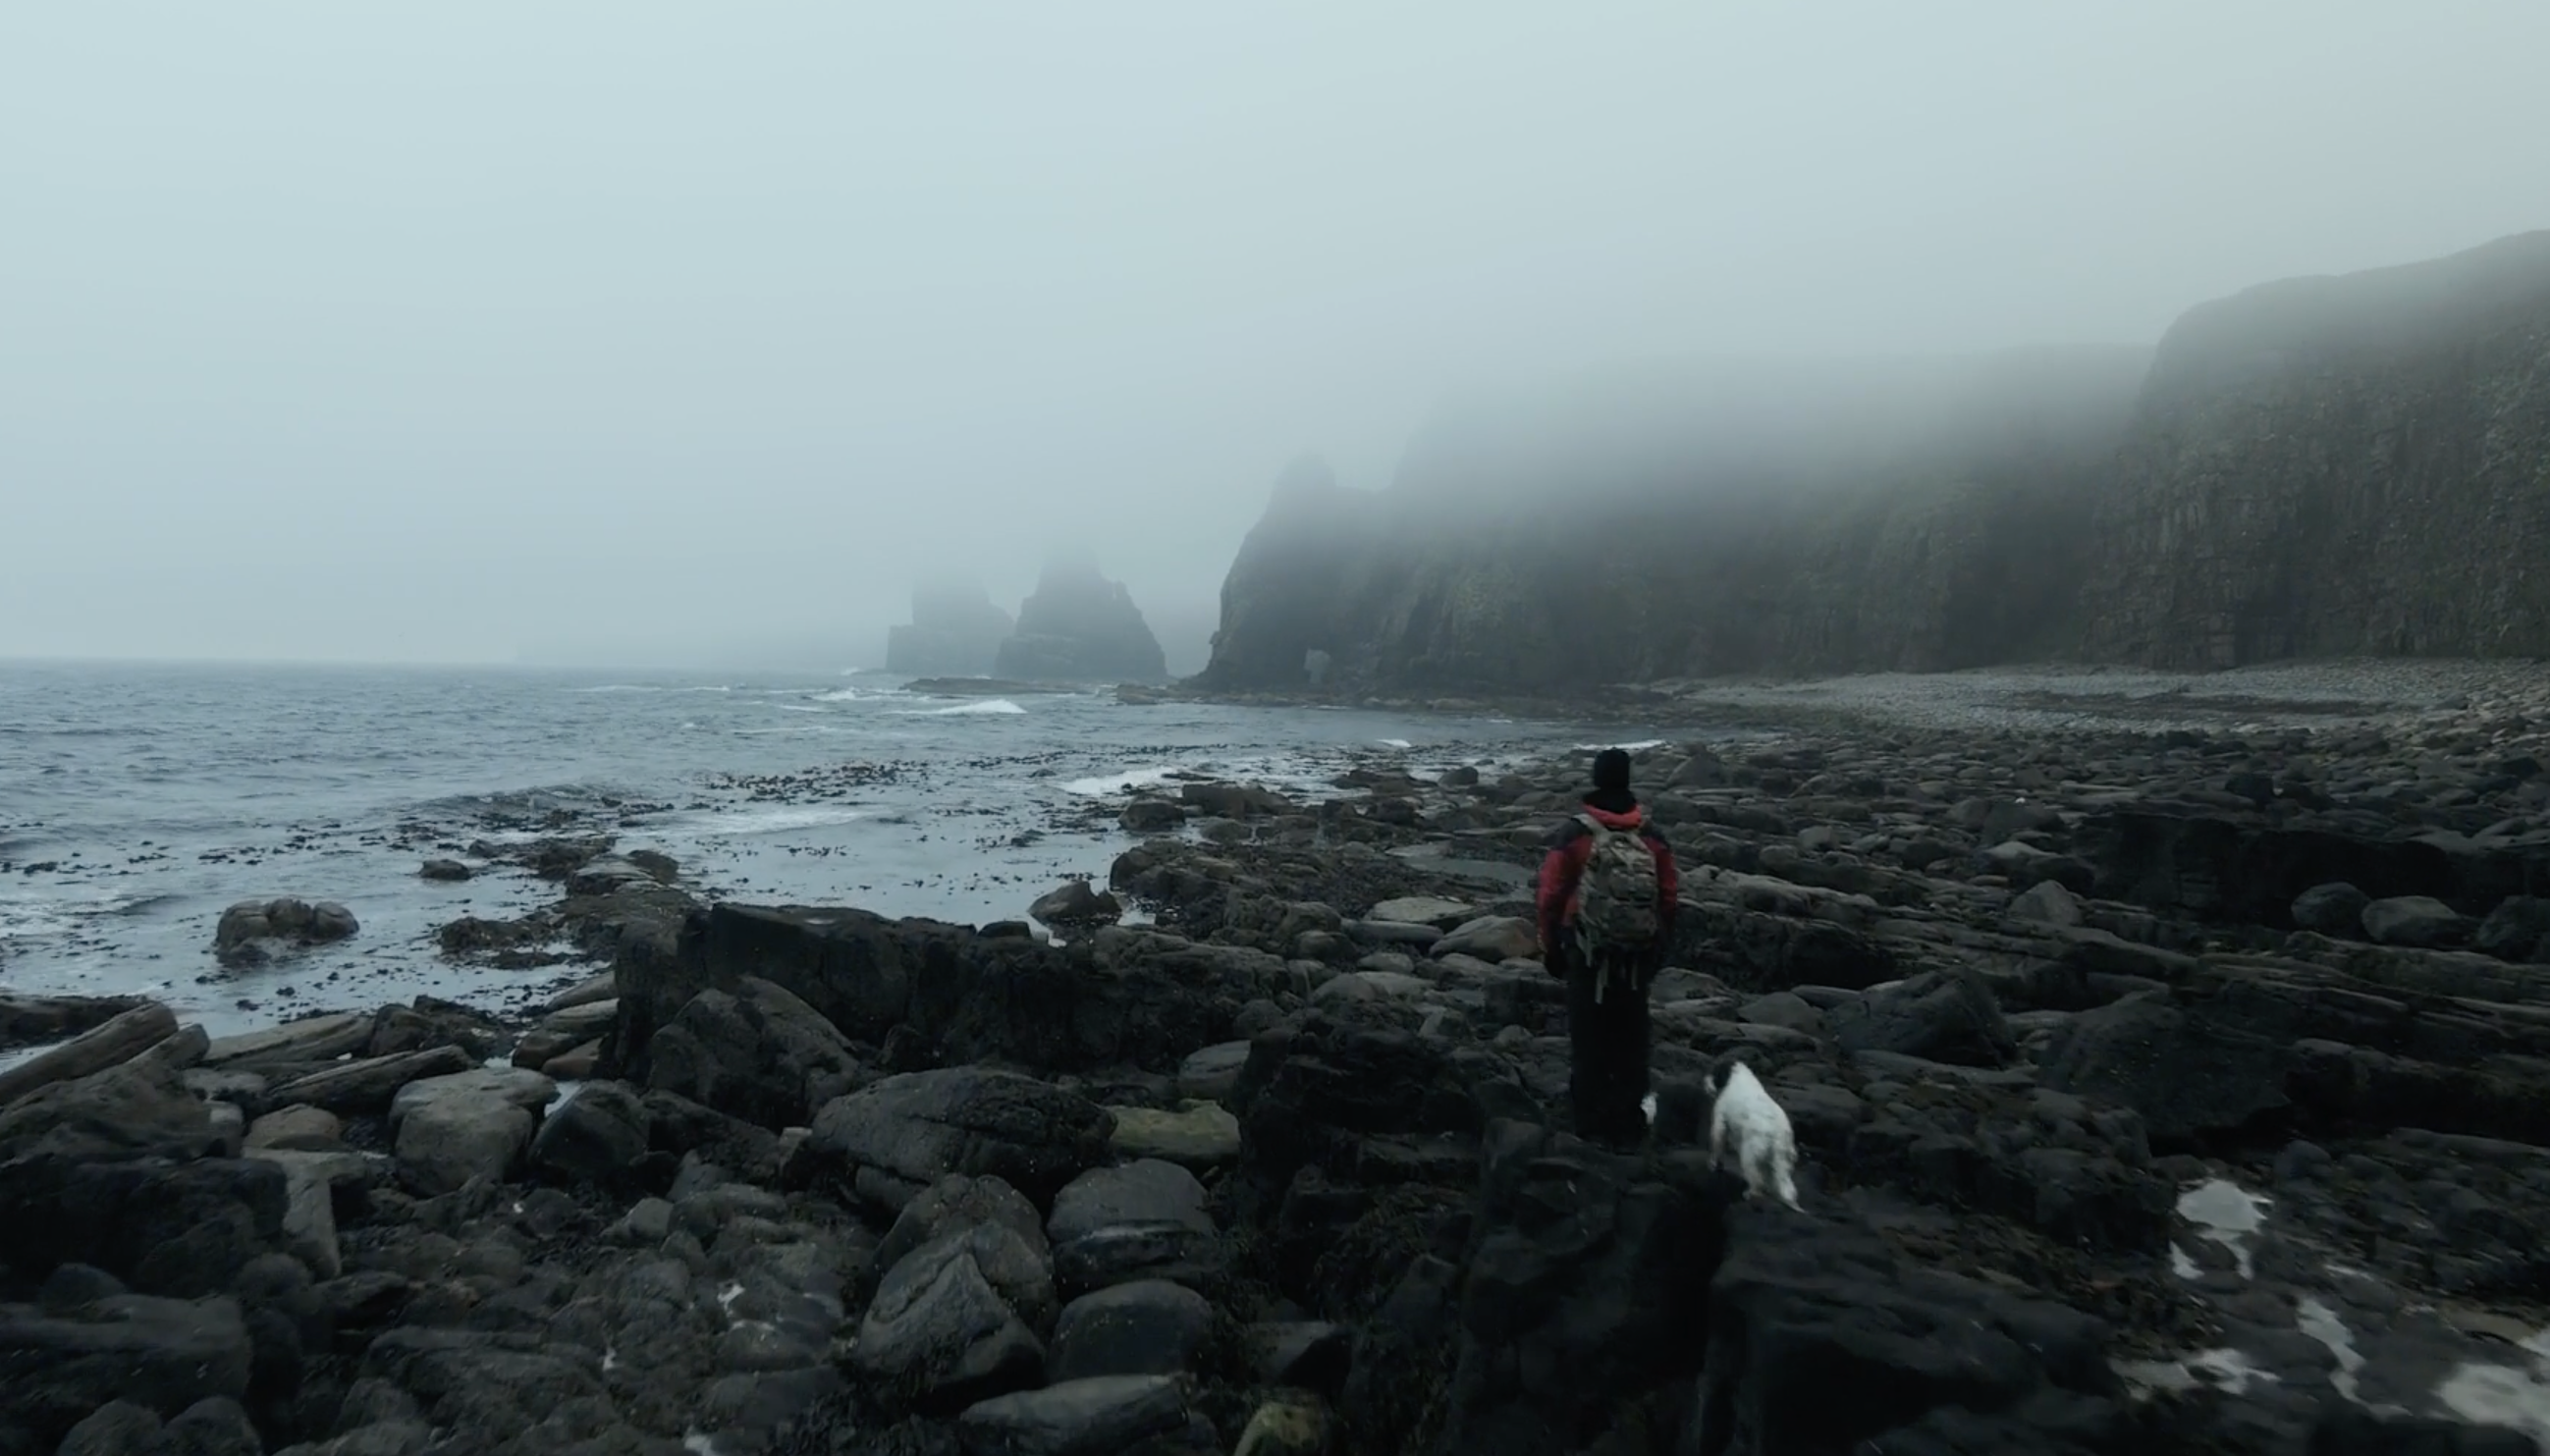 A rocky coast covered by fog. A man wearing a hat and a winter jacket stands over rocks on the beach and looks towards the ocean. A white and black dog is next to him.